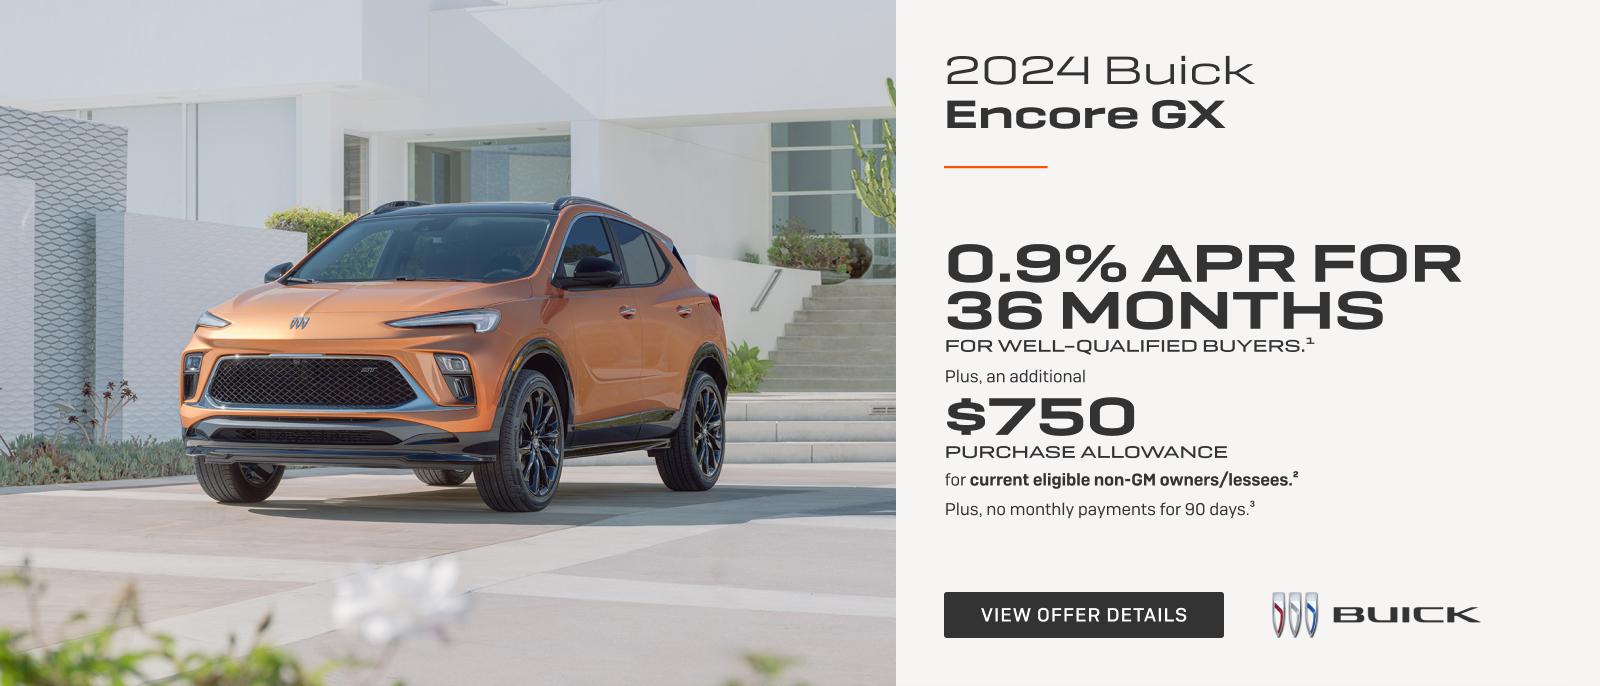 0.9% APR FOR 36 MONTHS 
FOR WELL-QUALIFIED BUYERS.1

Plus, an additional $750 PURCHASE ALLOWANCE for current eligible non-GM owners/lessees.2

Plus, no monthly payments for 90 days.3